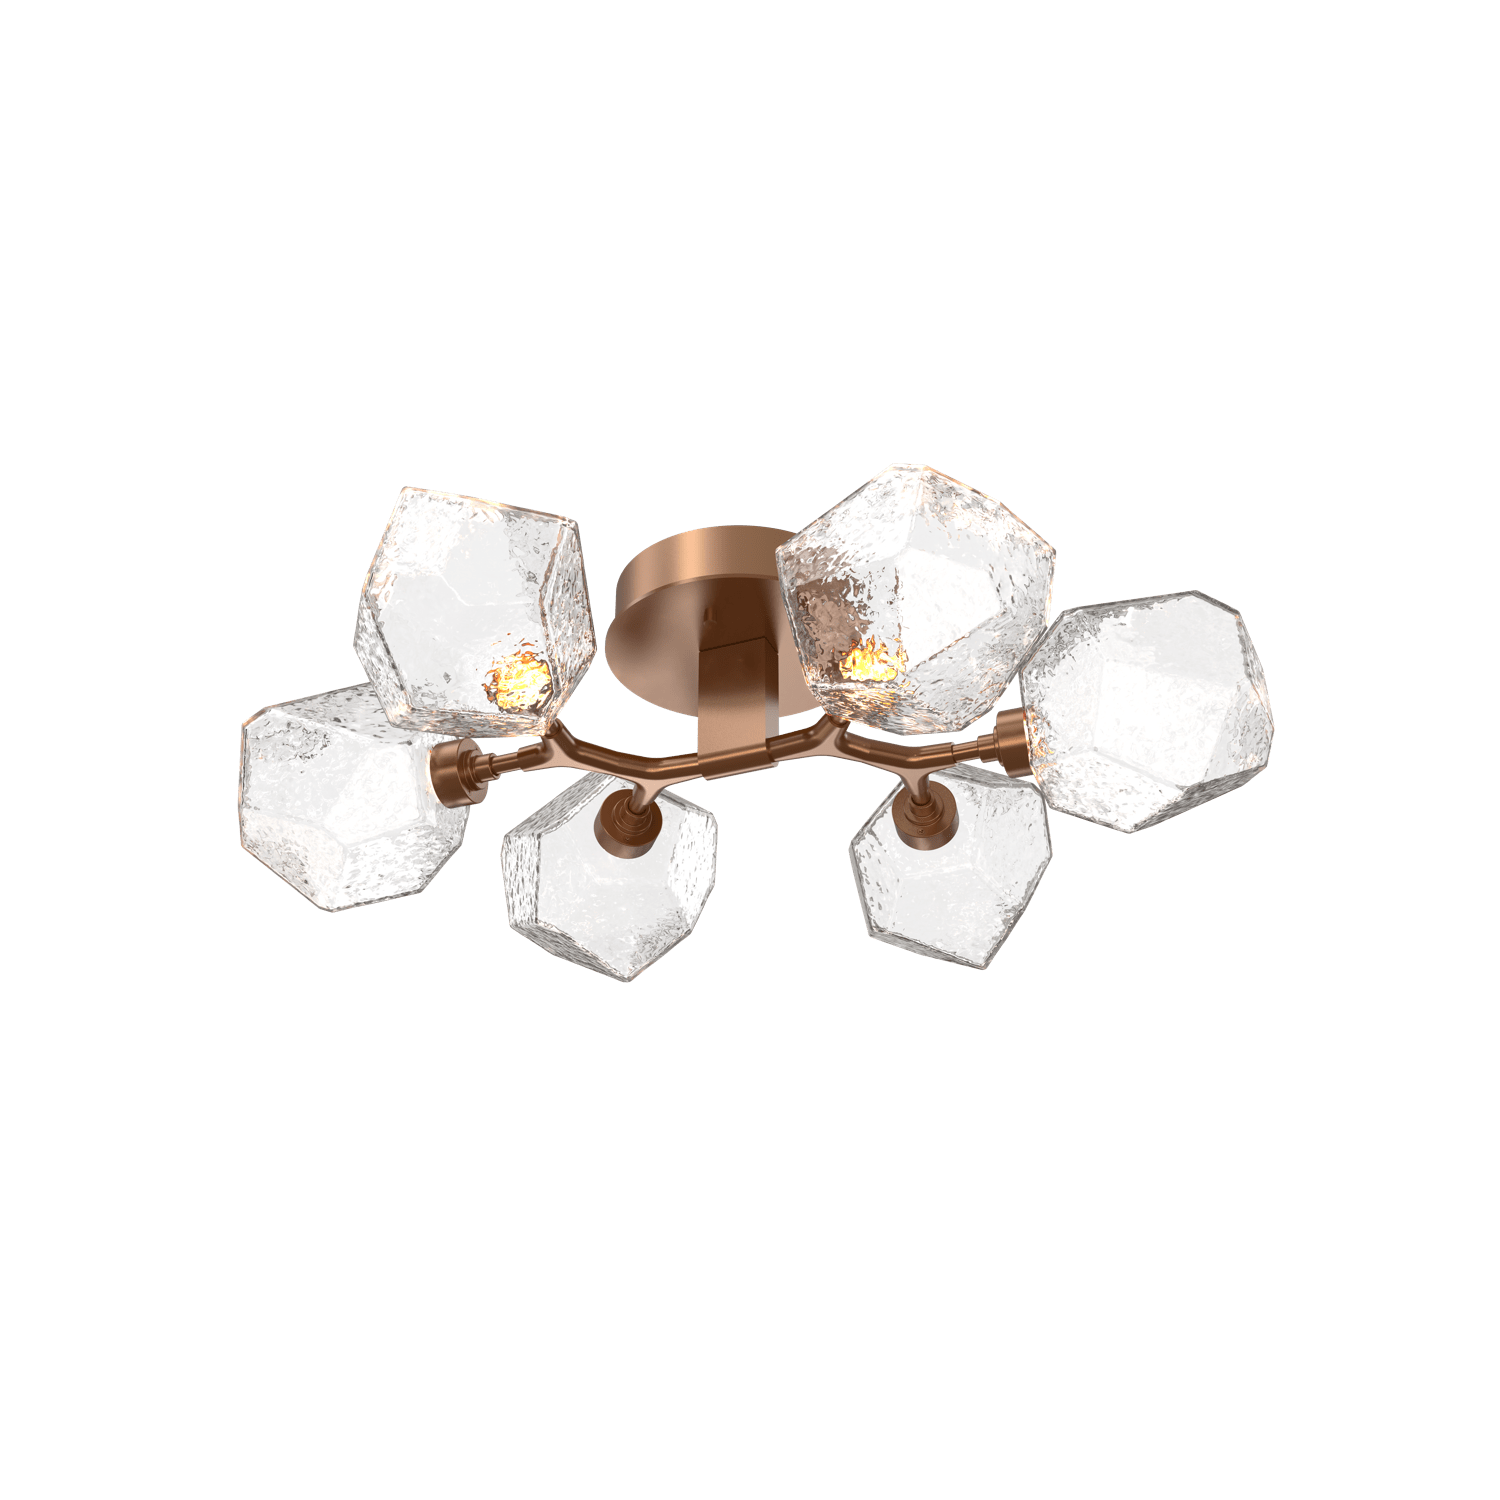 CLB0039-01-NB-C-Hammerton-Studio-Gem-6-light-organic-flush-mount-light-with-novel-brass-finish-and-clear-blown-glass-shades-and-LED-lamping